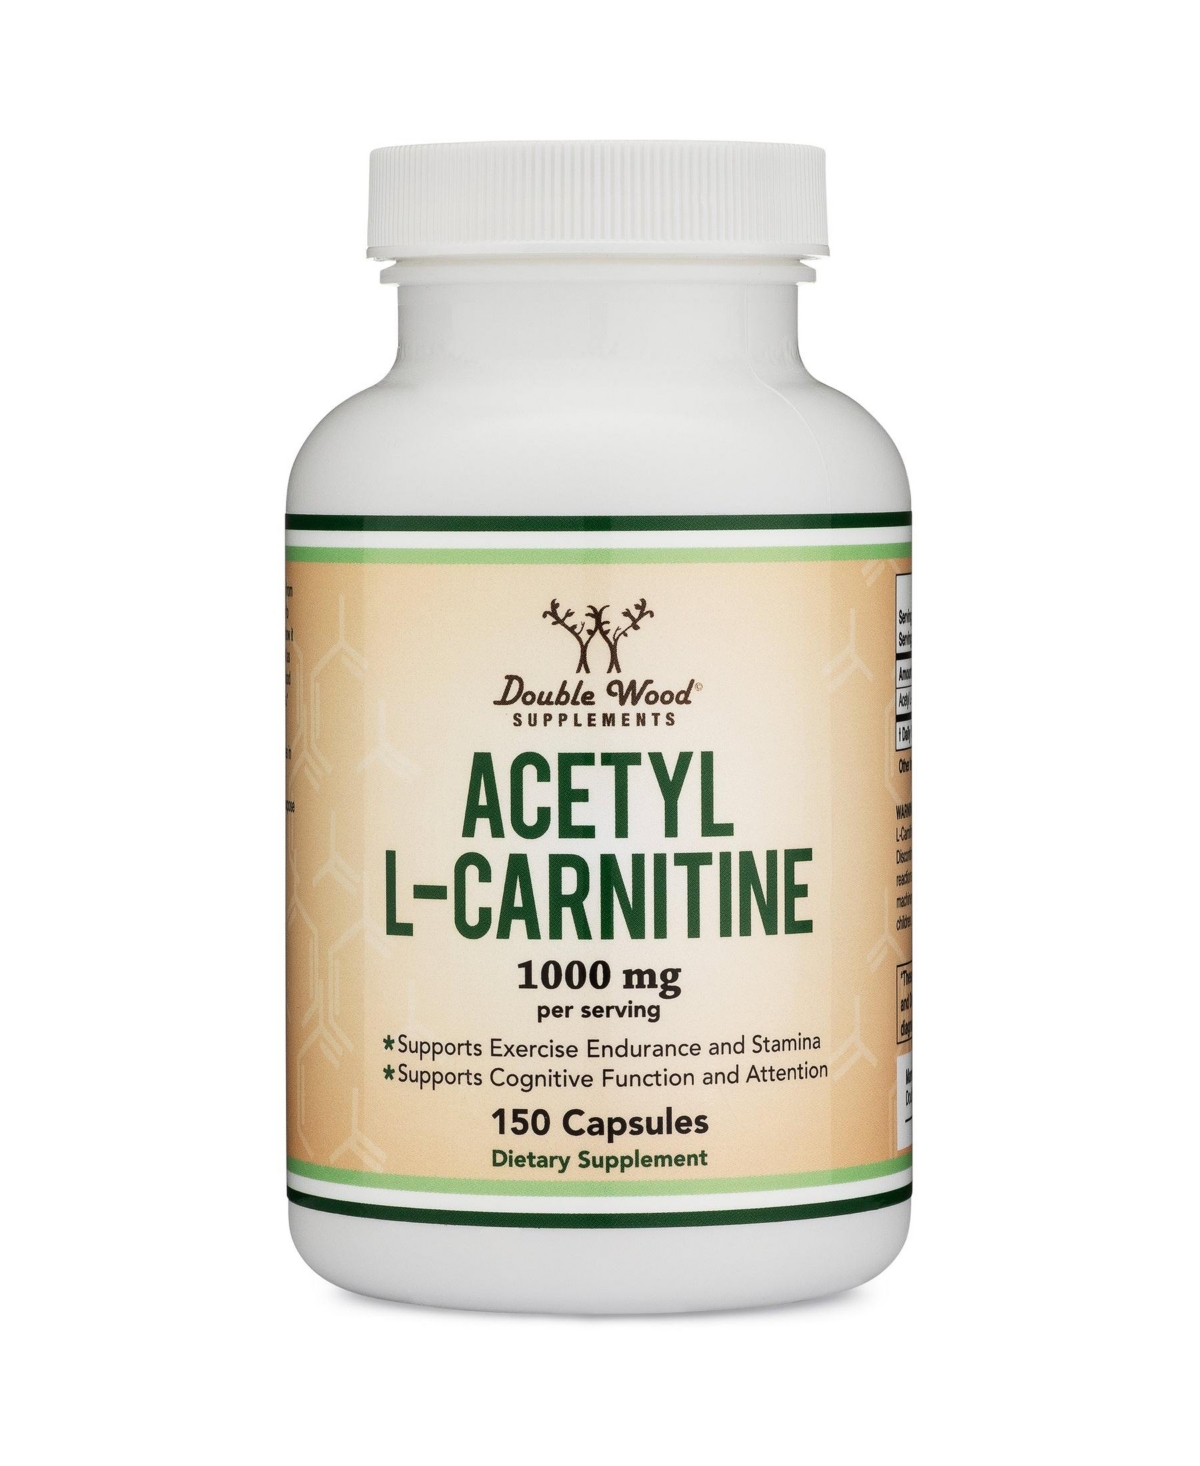 Acetyl L-Carnitine- 150 capsules, 1000 mg servings